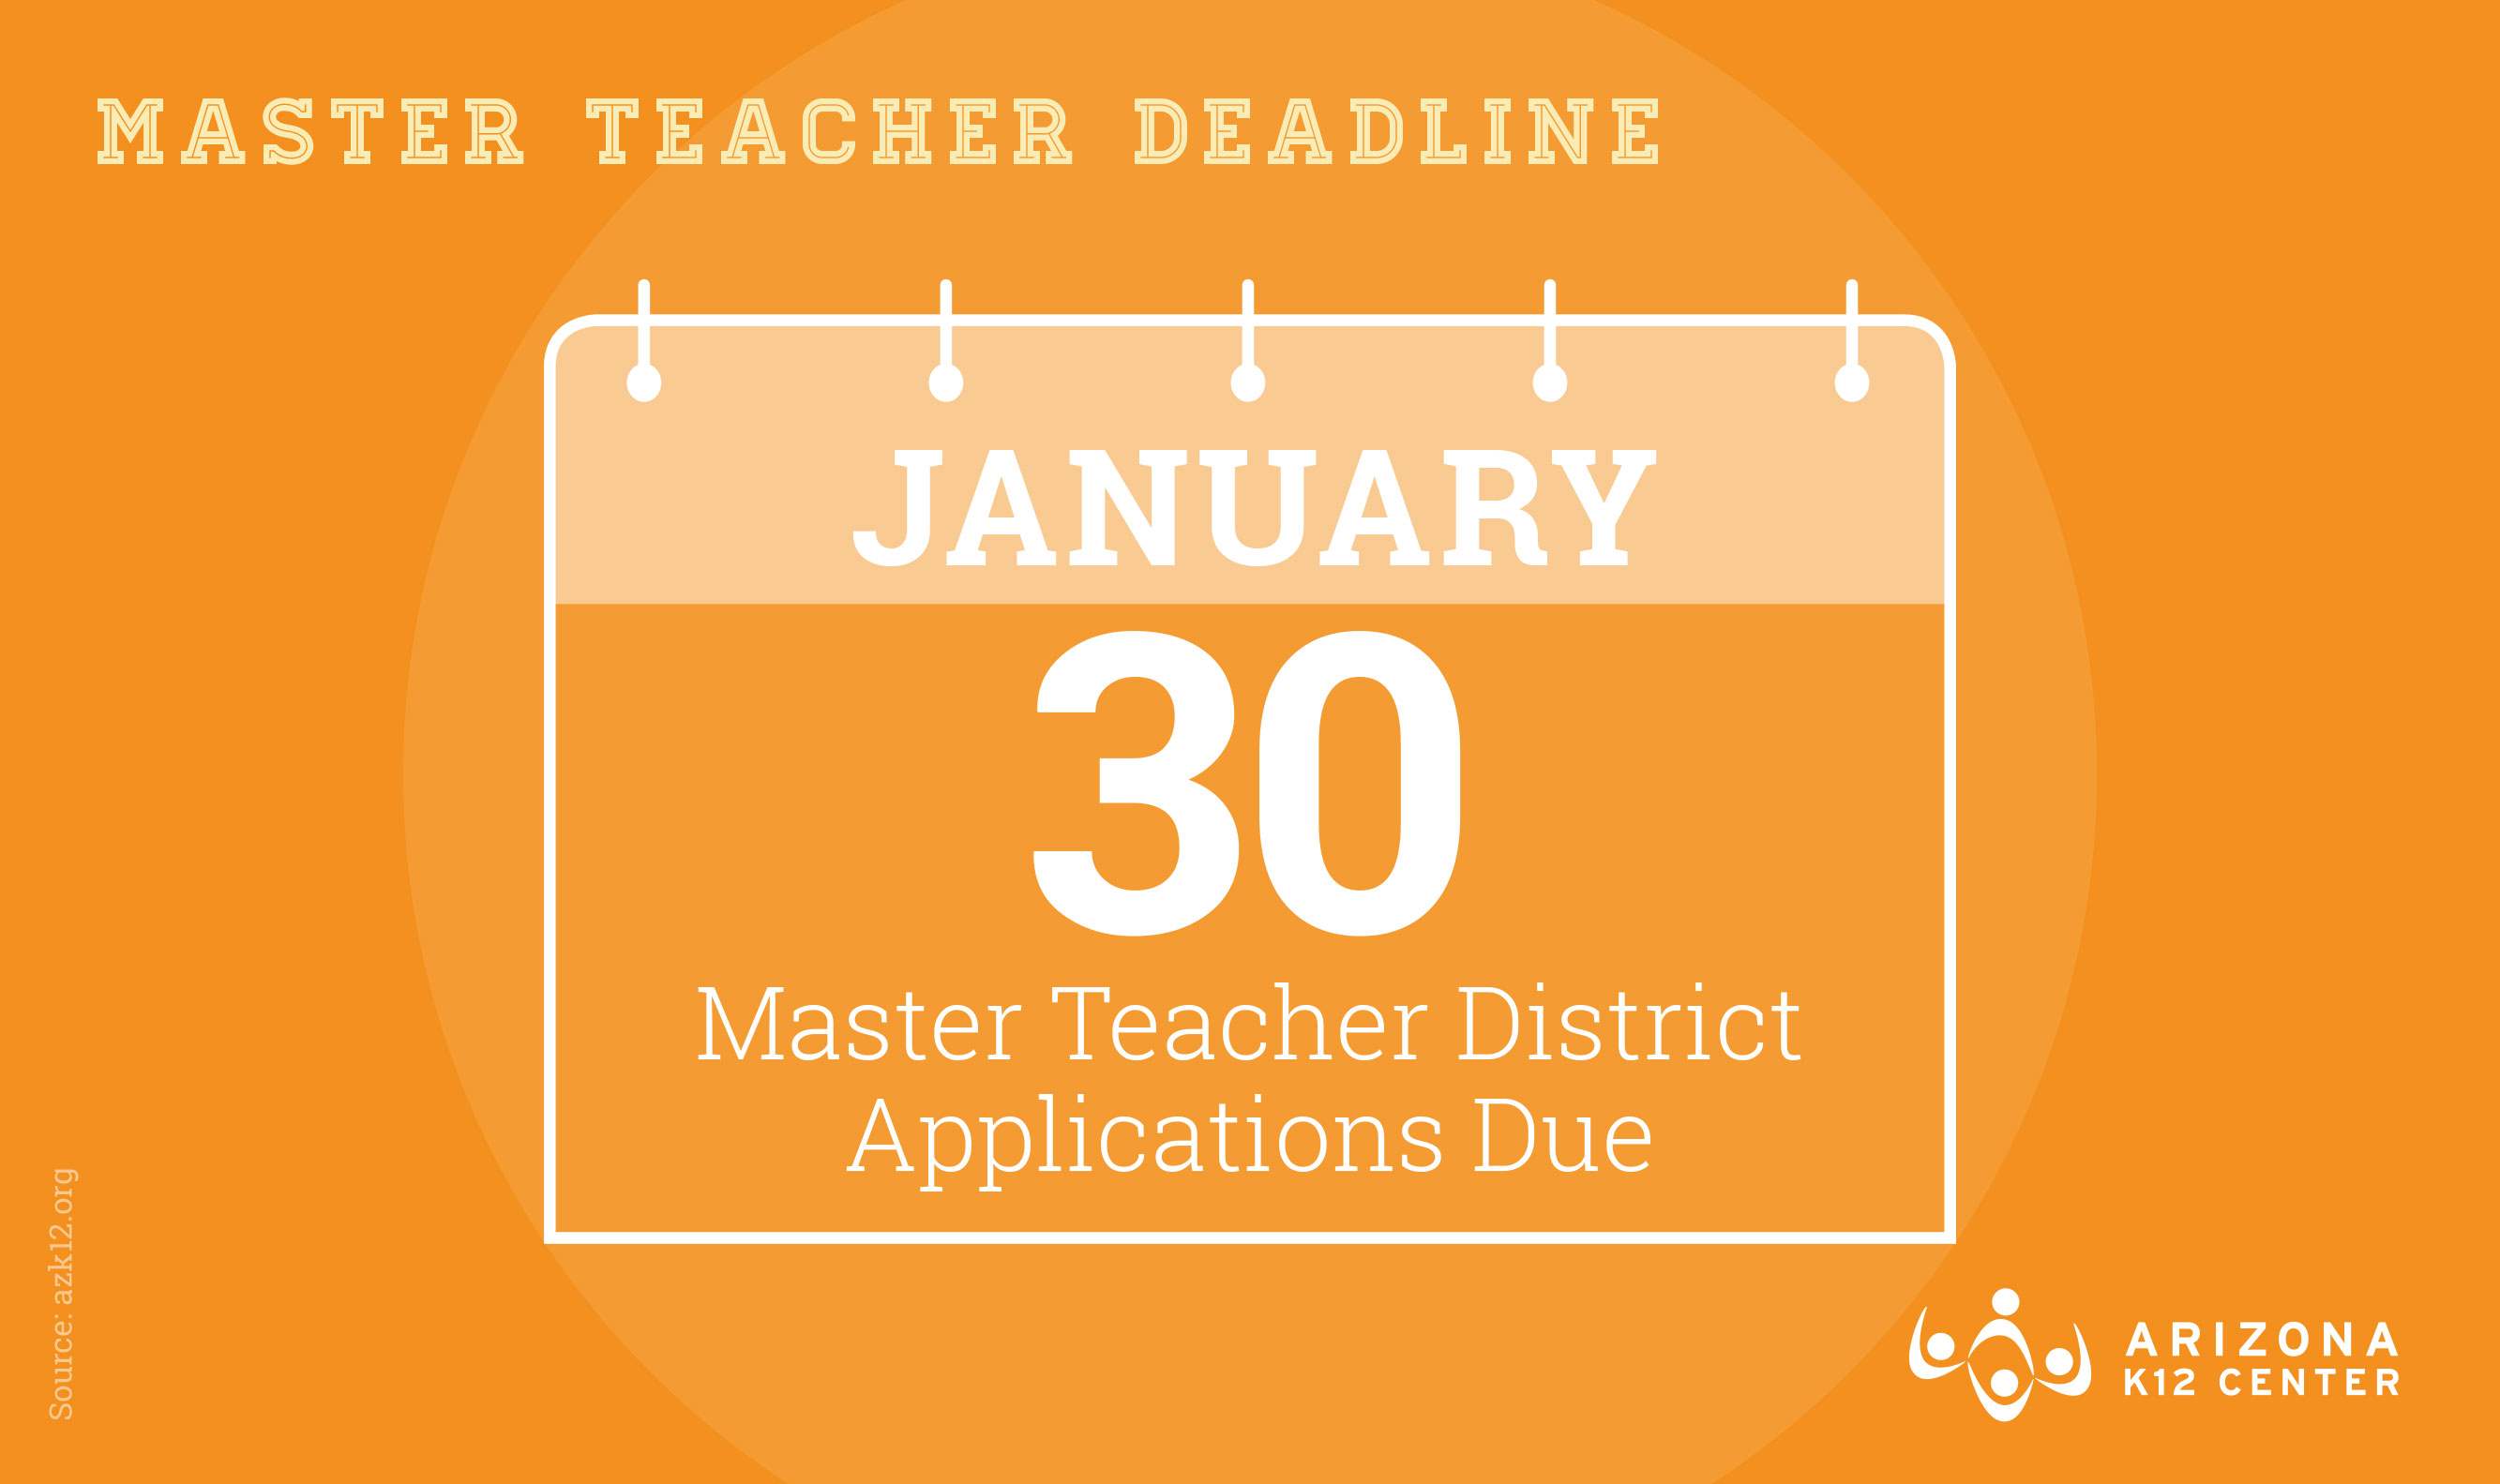 Master Teacher Applications are Due Soon – Don’t Miss the Date!